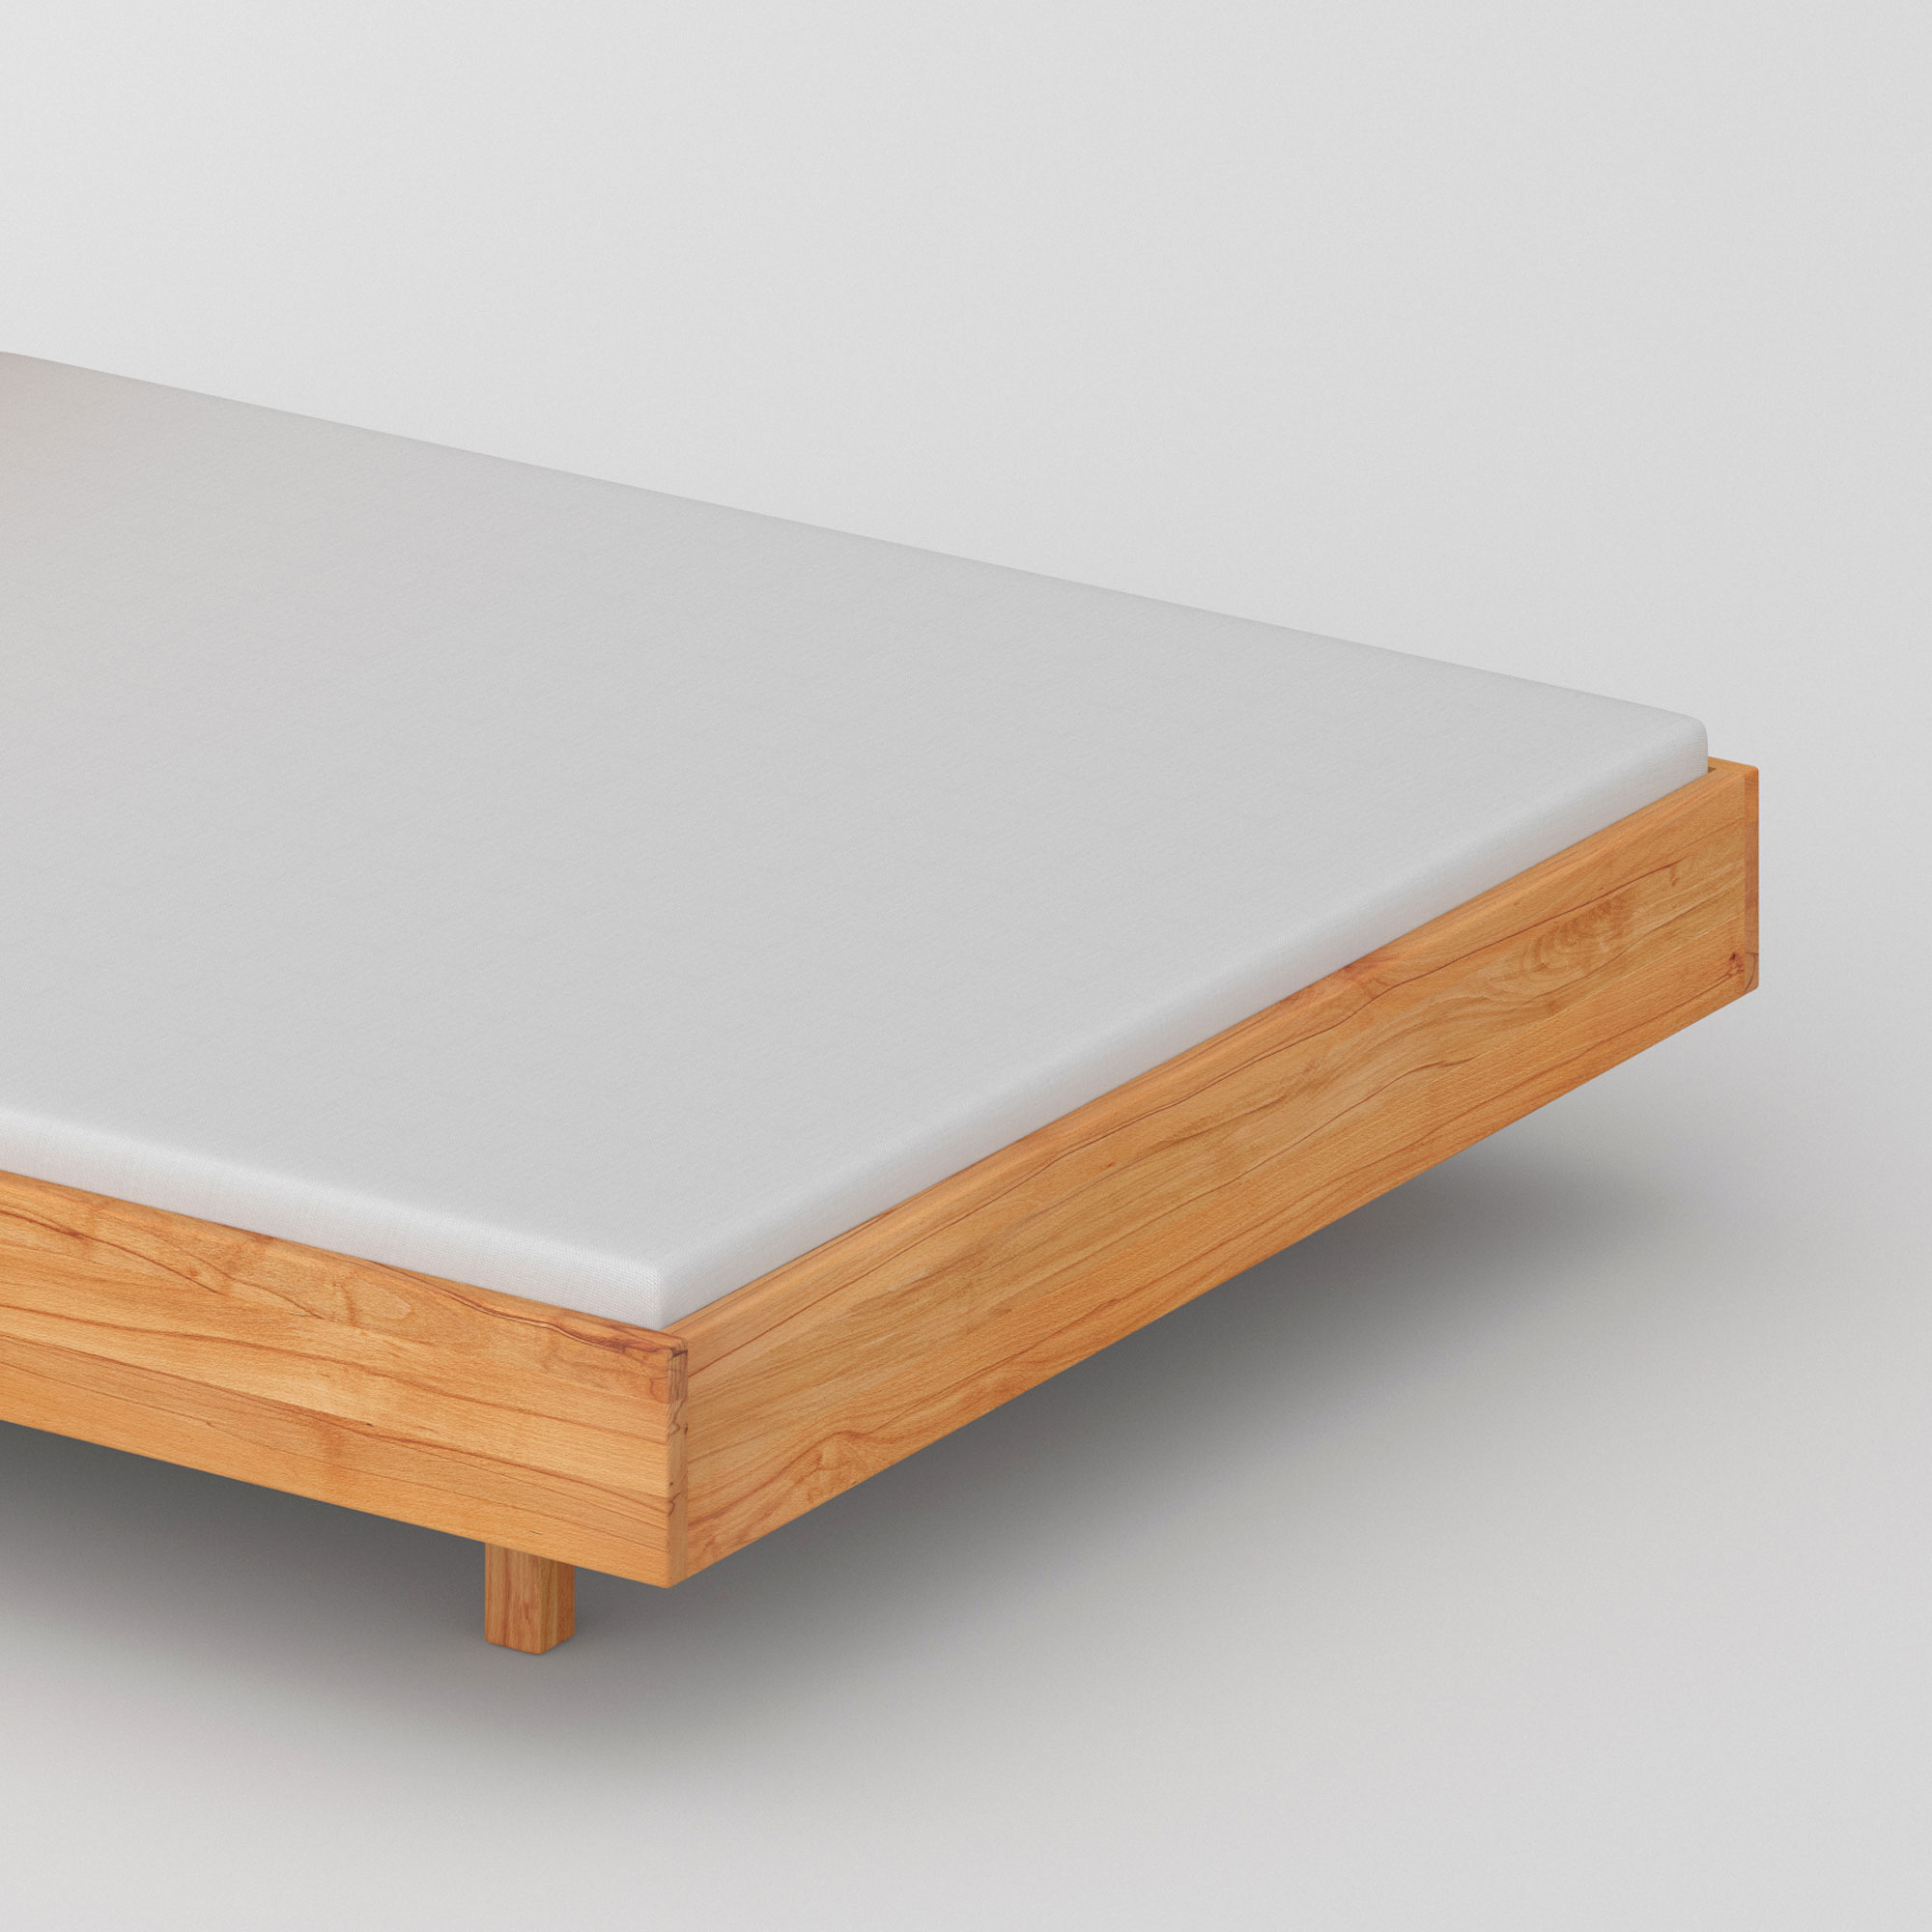 Solid Wood Bed Frame QUADRA SOFT FRAME Cut-cam1 custom made in solid wood by vitamin design